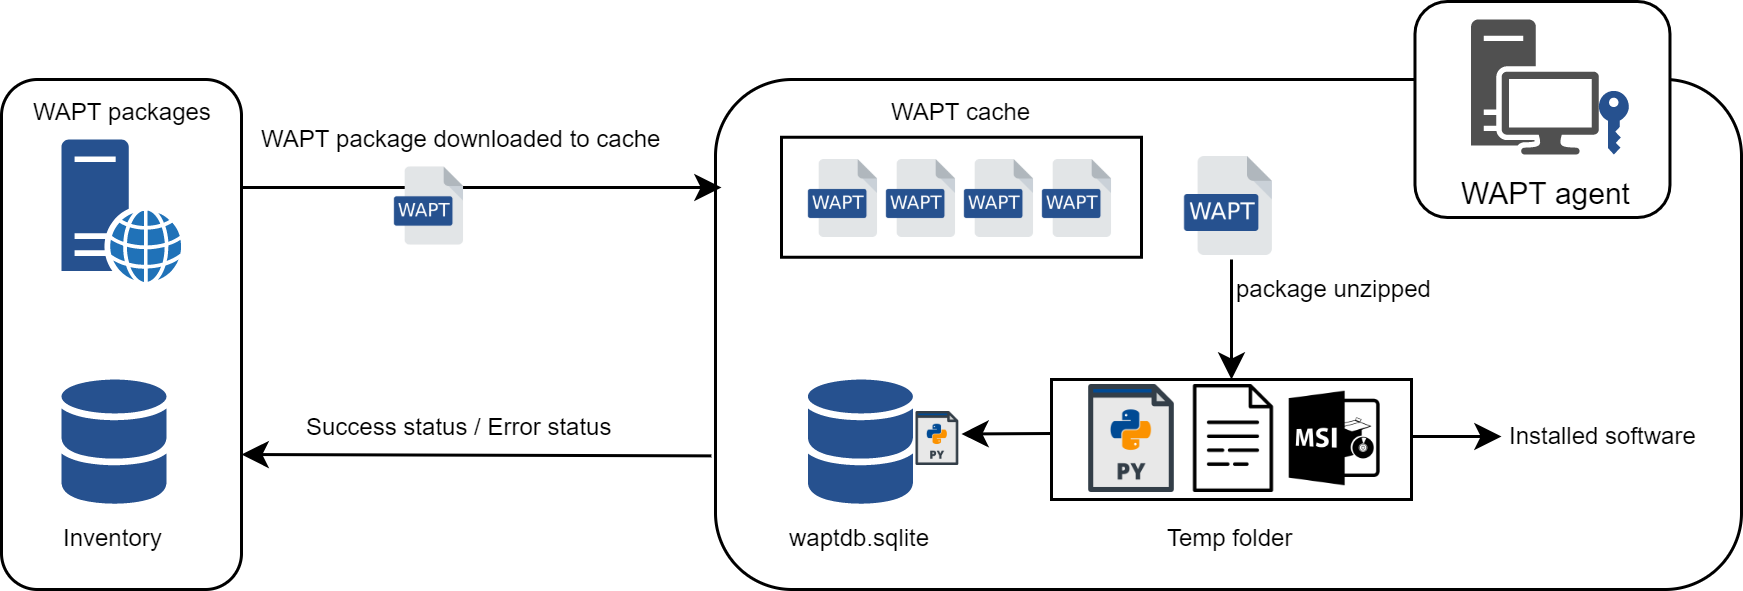 Flow diagram showing the installation process for a WAPT package